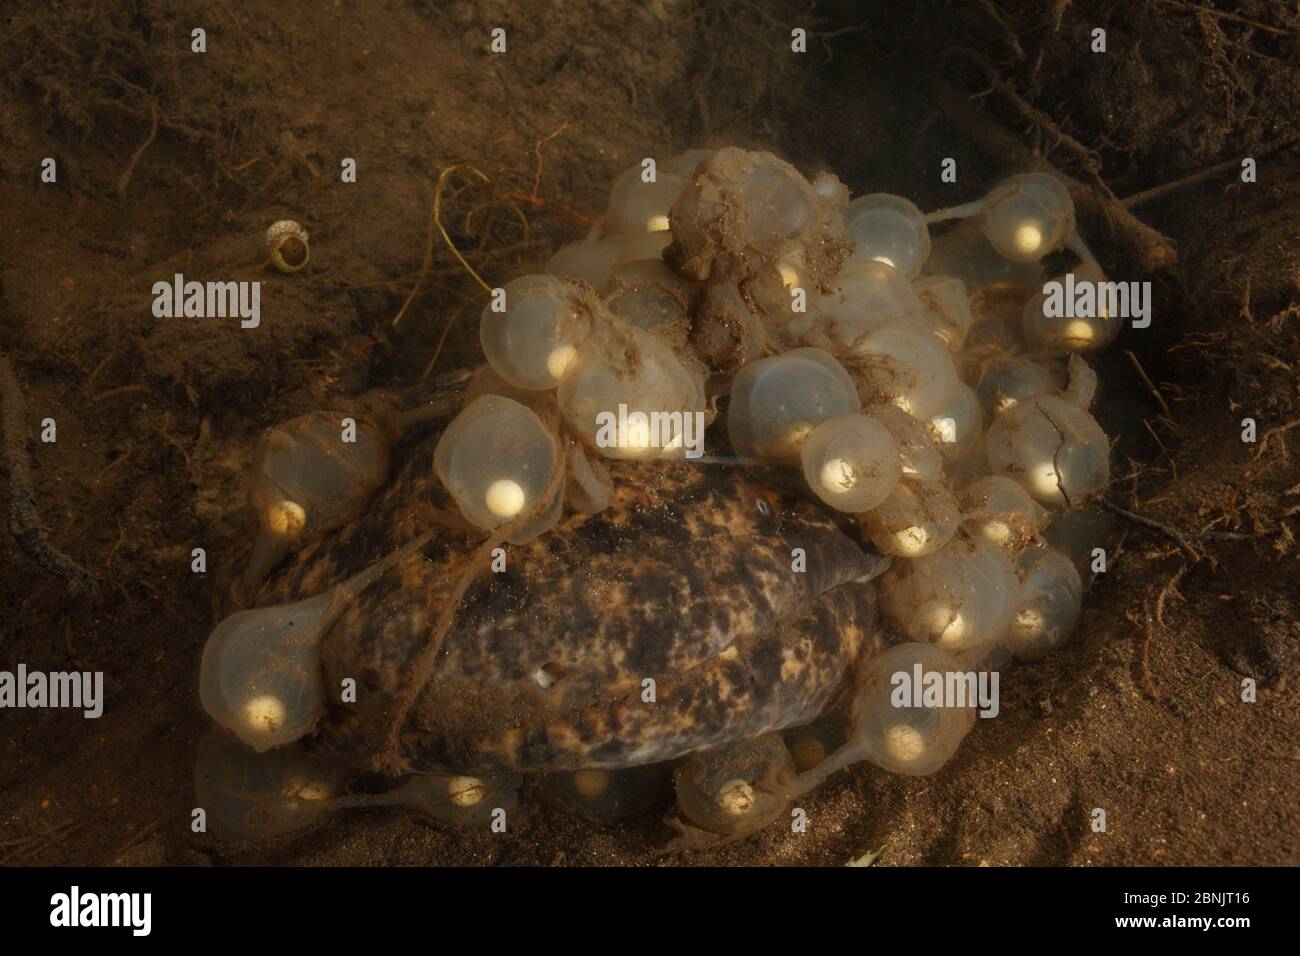 Japanese giant salamander (Andrias japonicus) nest with eggs and adult during spawning, Honshu, Japan, September. Stock Photo